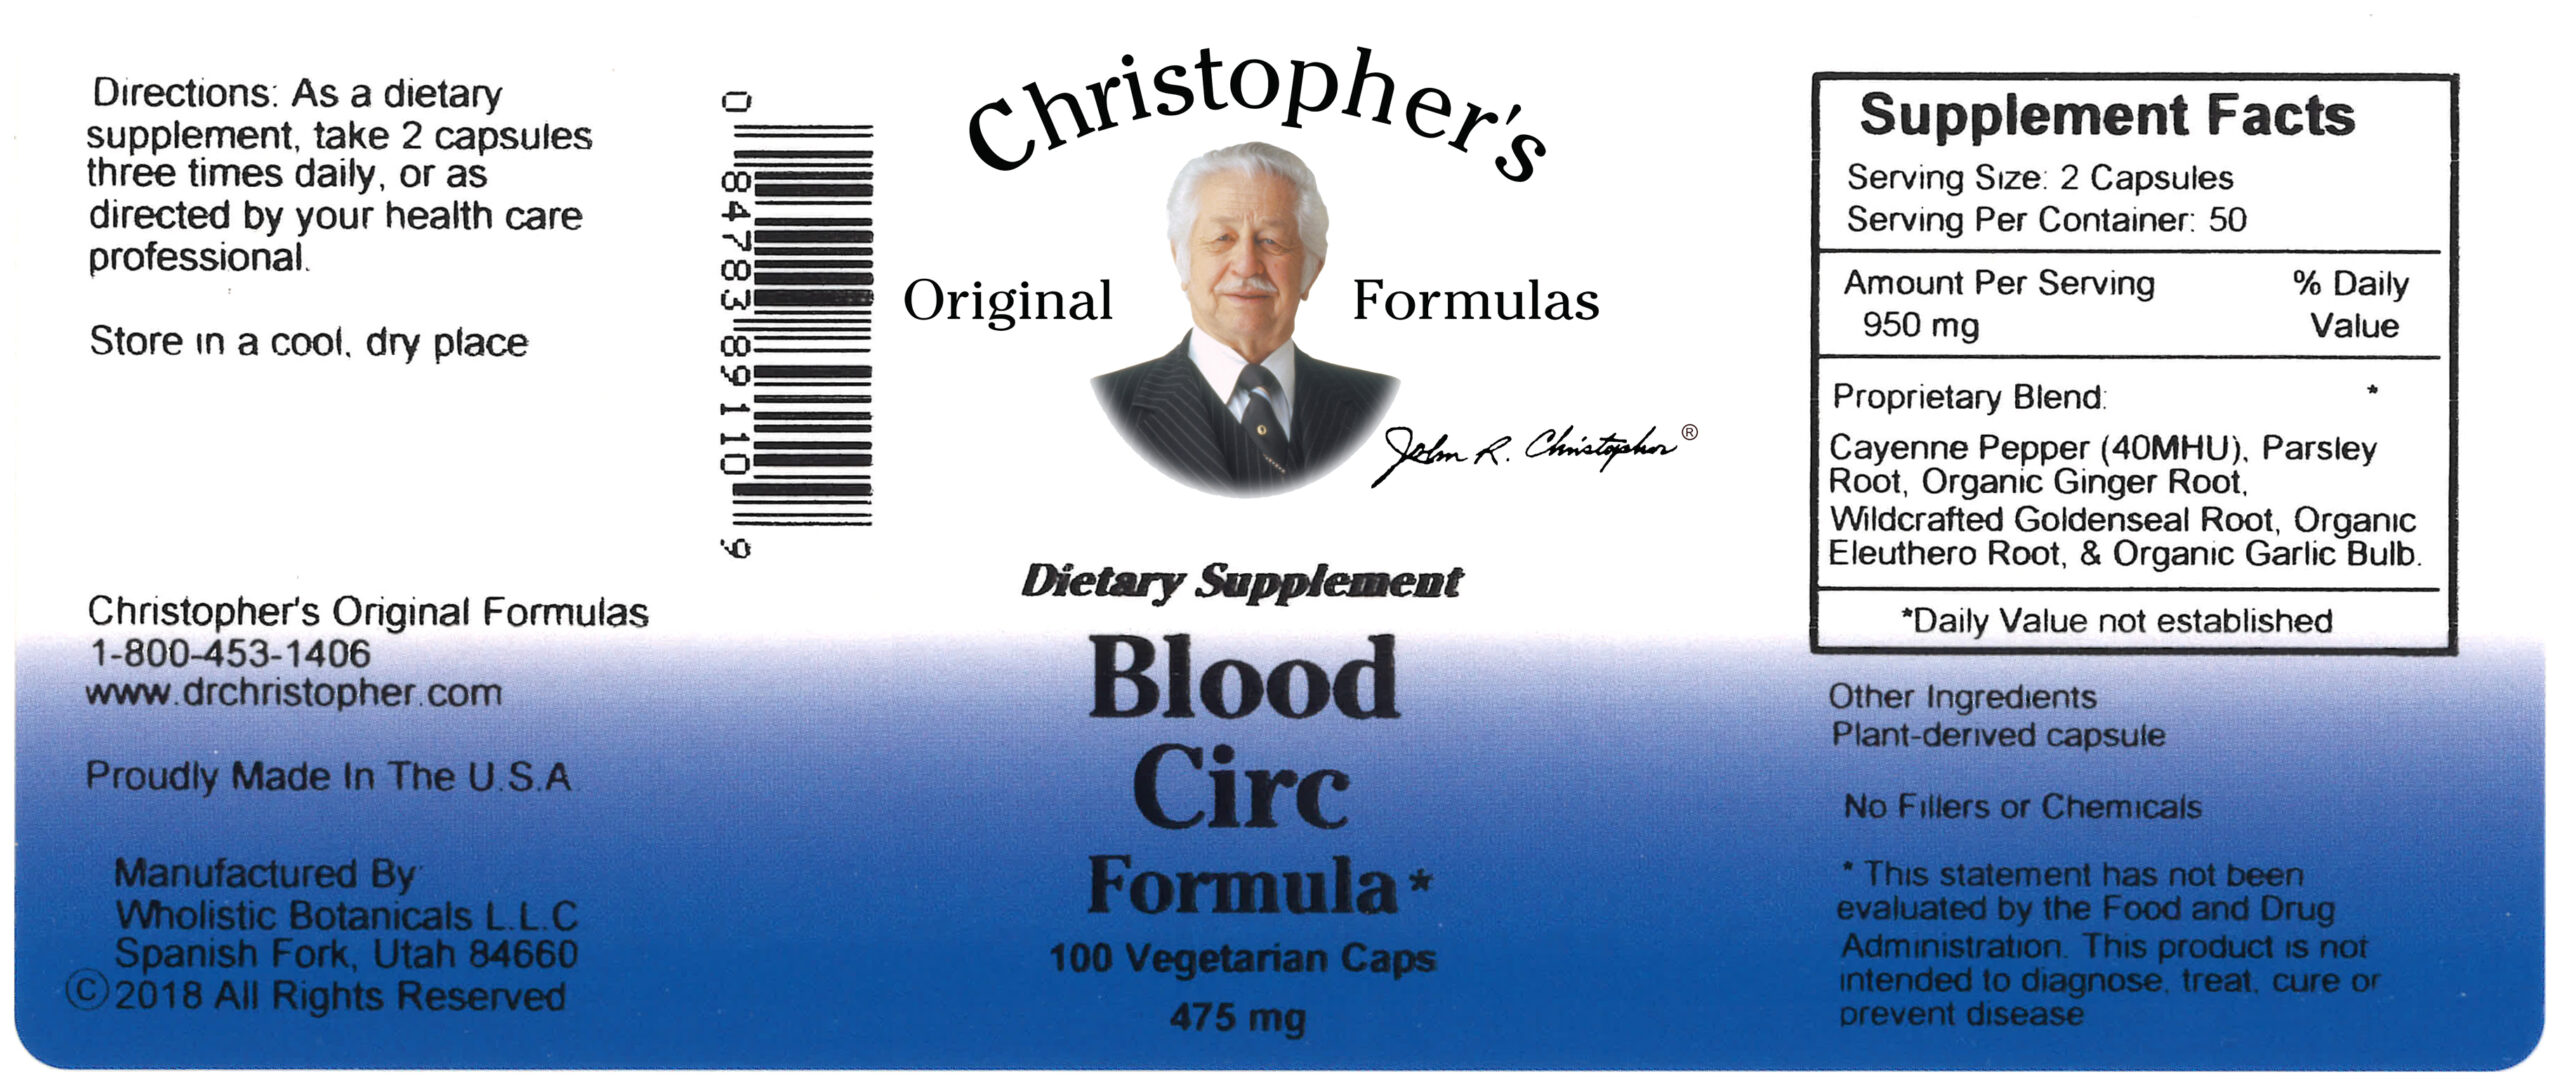 dr christophers blood circ capsules supplement facts